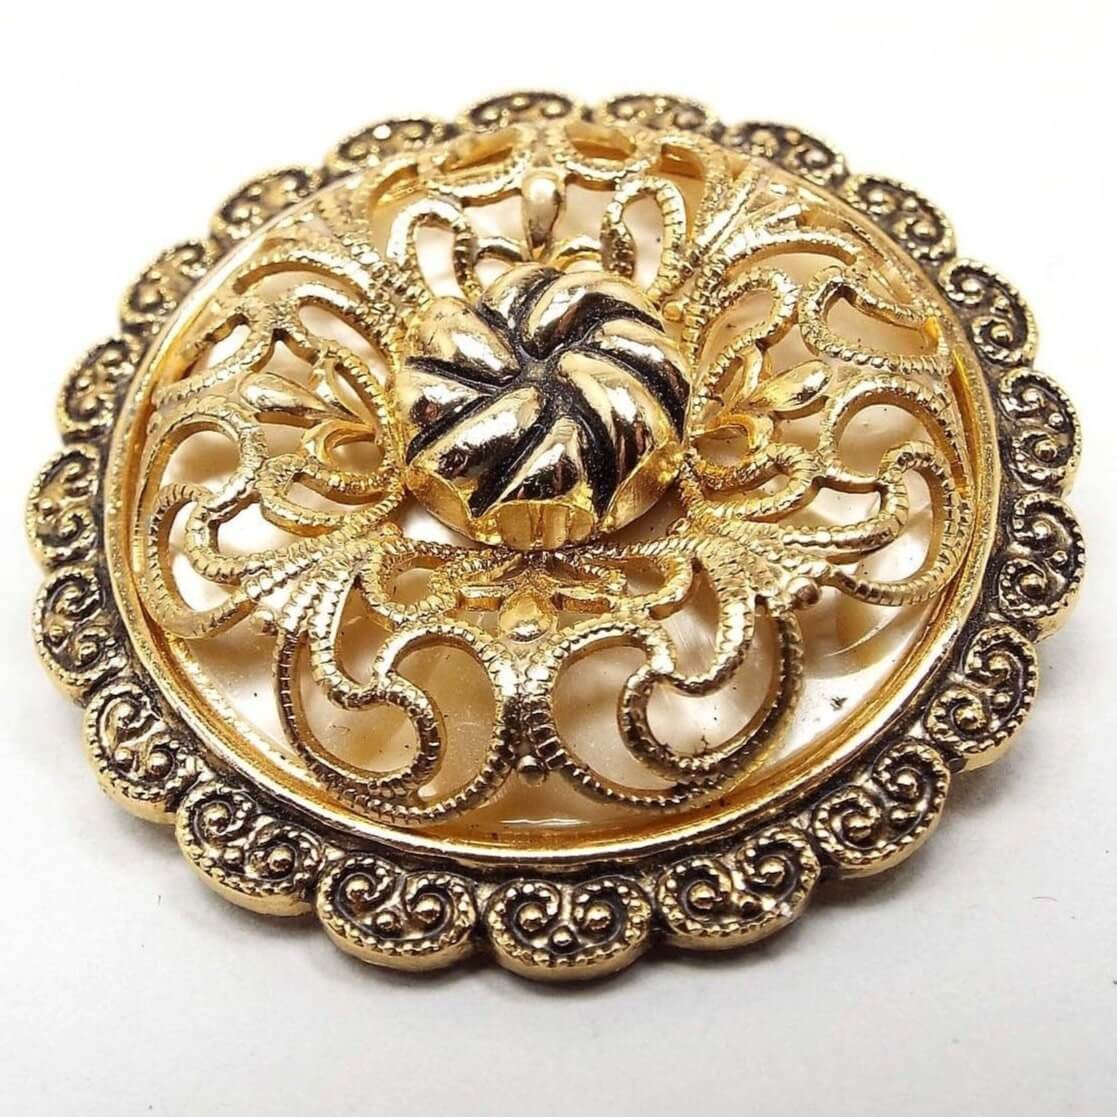 Front view of the Mid Century vintage German scarf clip. It is round in shape with a scalloped textured edge. The top is domed with a filigree design in gold color over a plastic pearly off white background underneath. The middle has a round gold tone bead with a textured twist like appearance. 